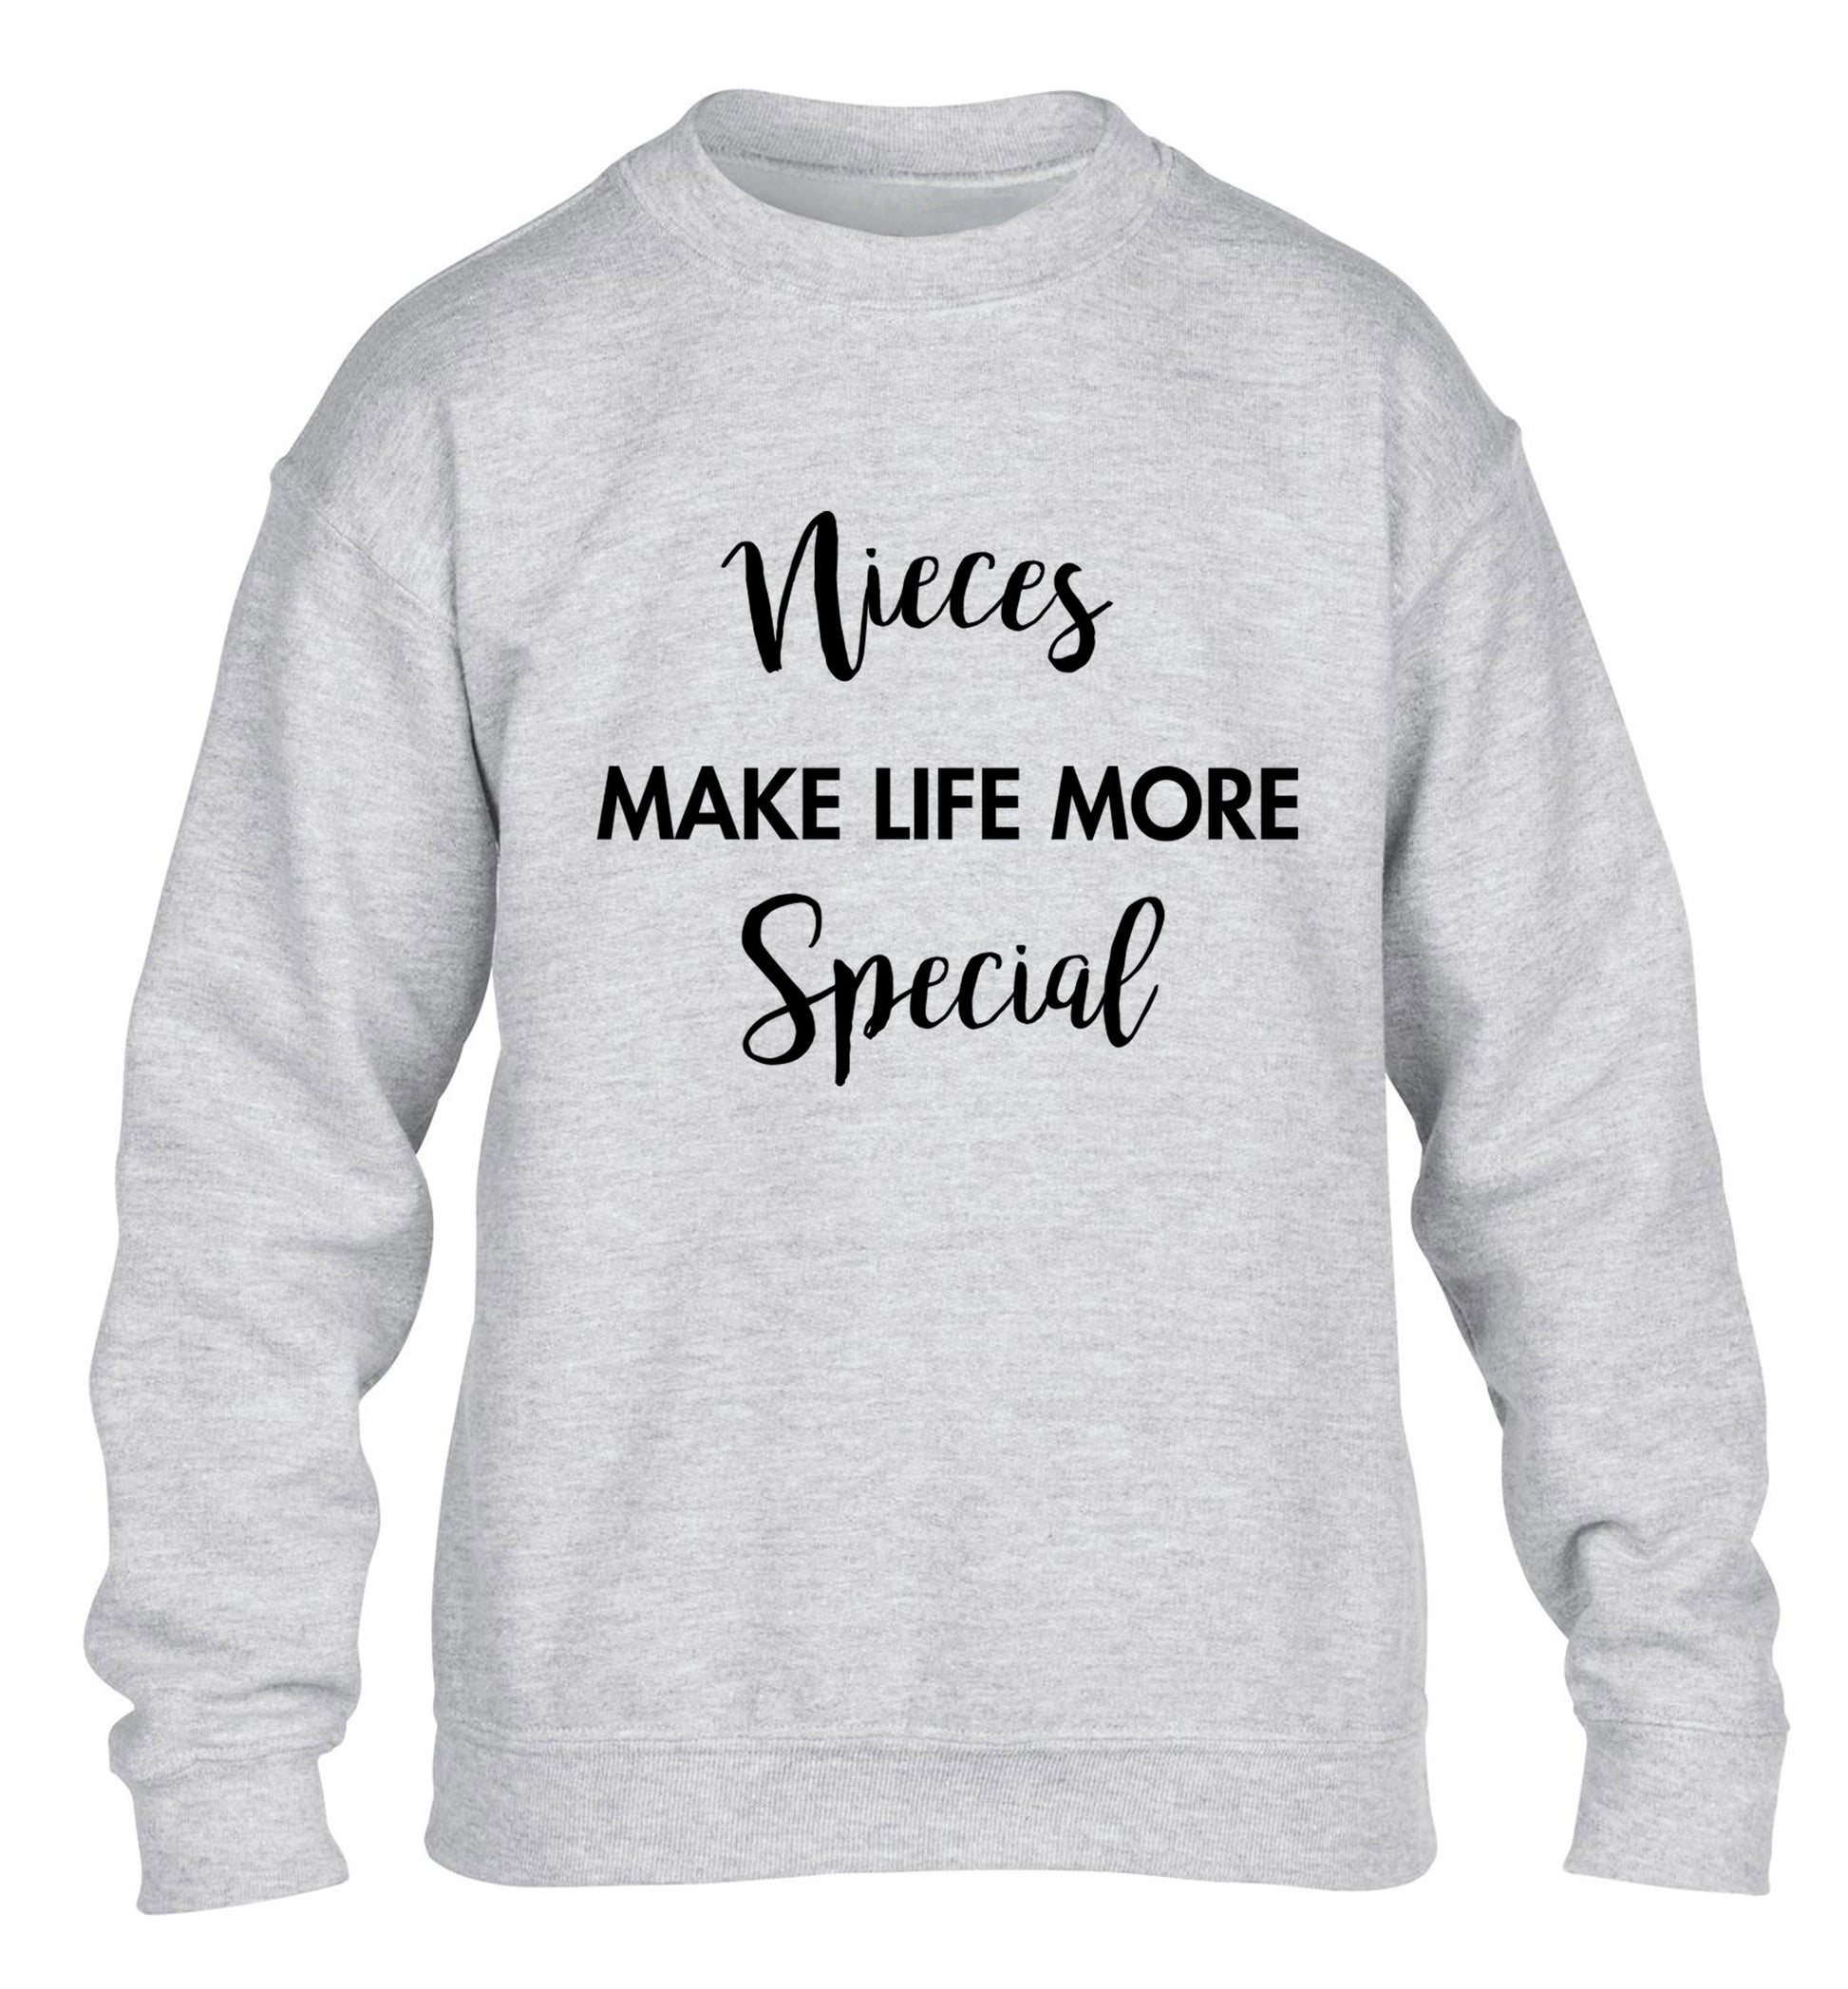 Nieces make life more special children's grey sweater 12-14 Years